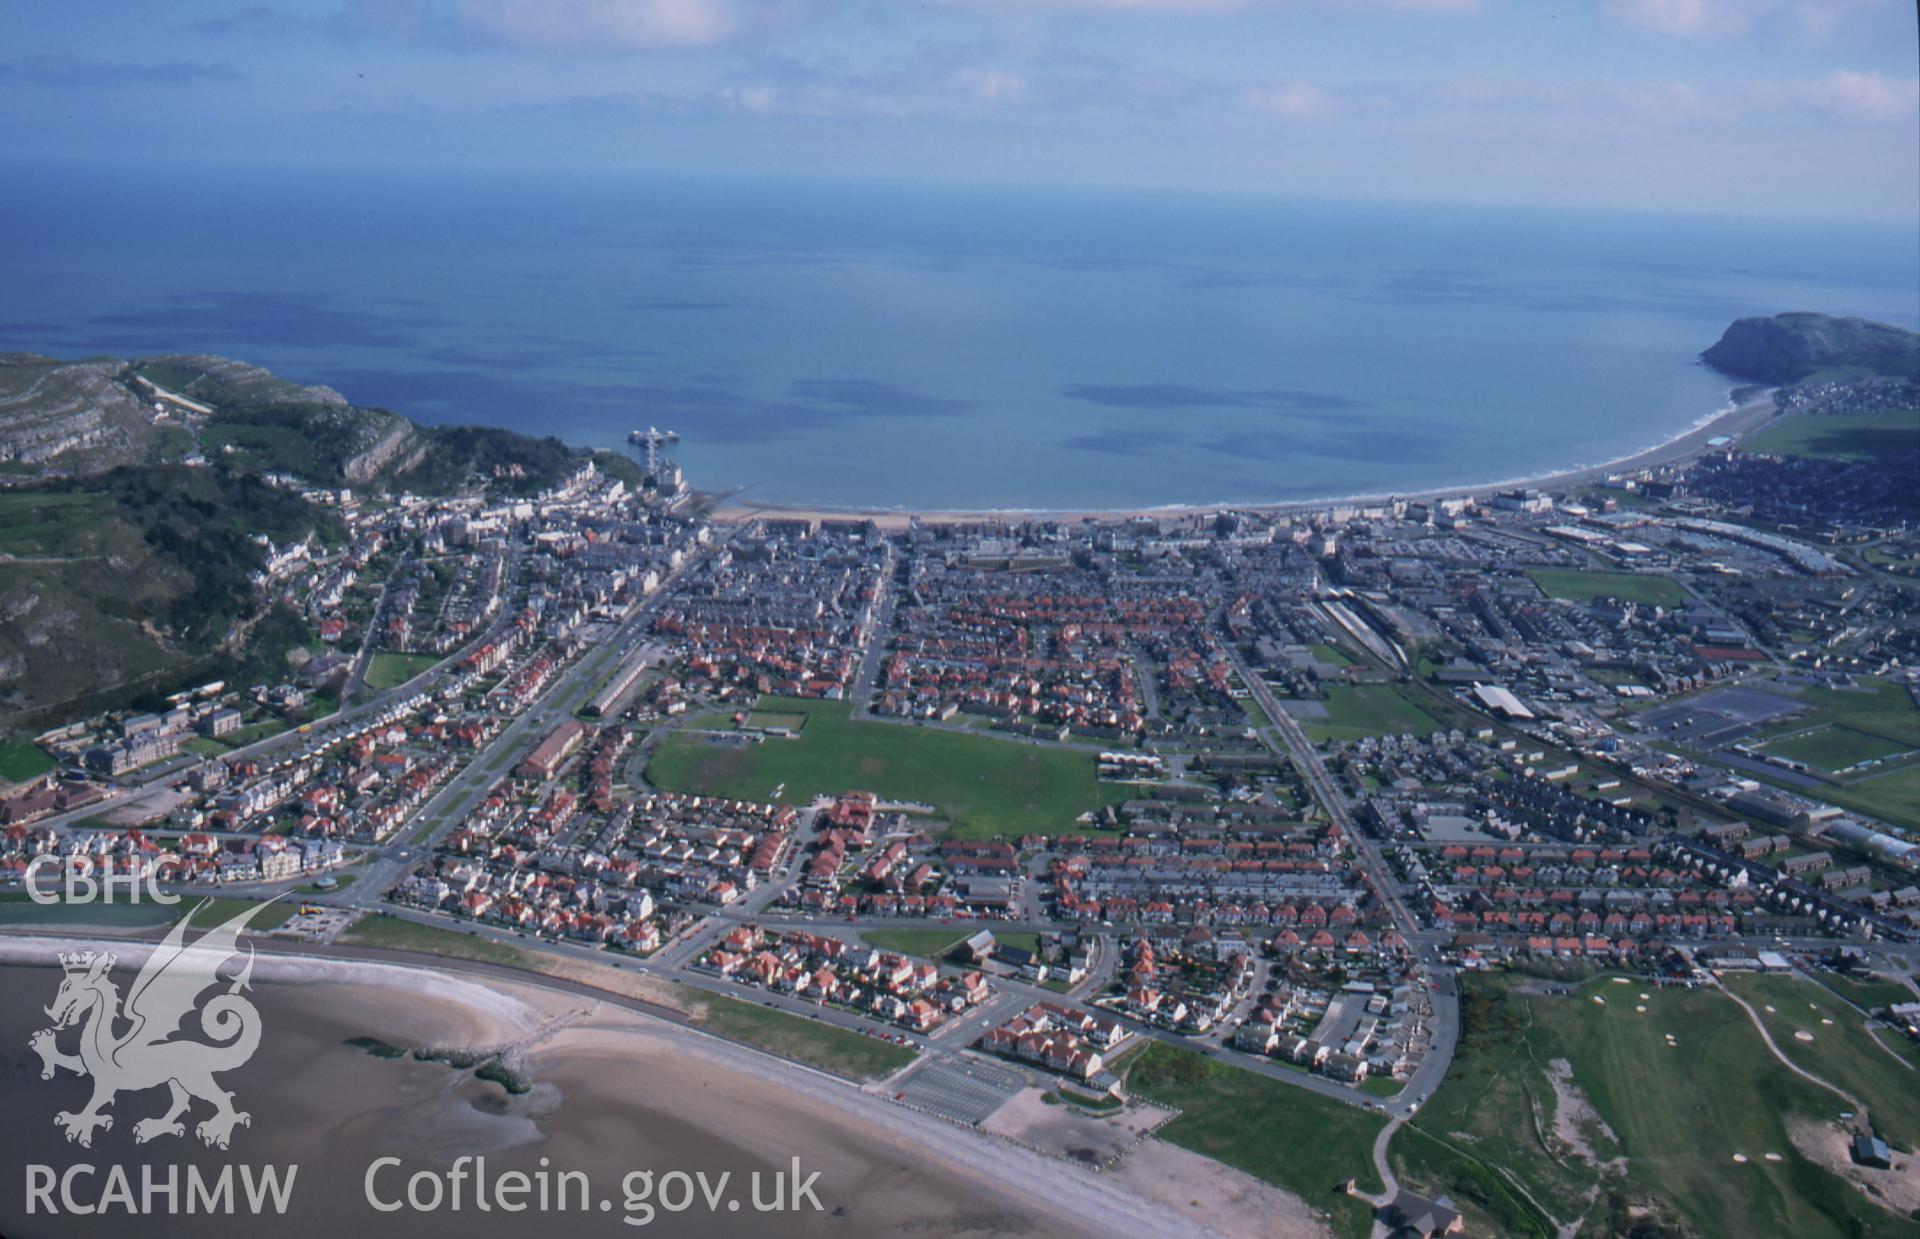 Slide of RCAHMW colour oblique aerial photograph of Llandudno, taken by T.G. Driver, 18/4/1998.